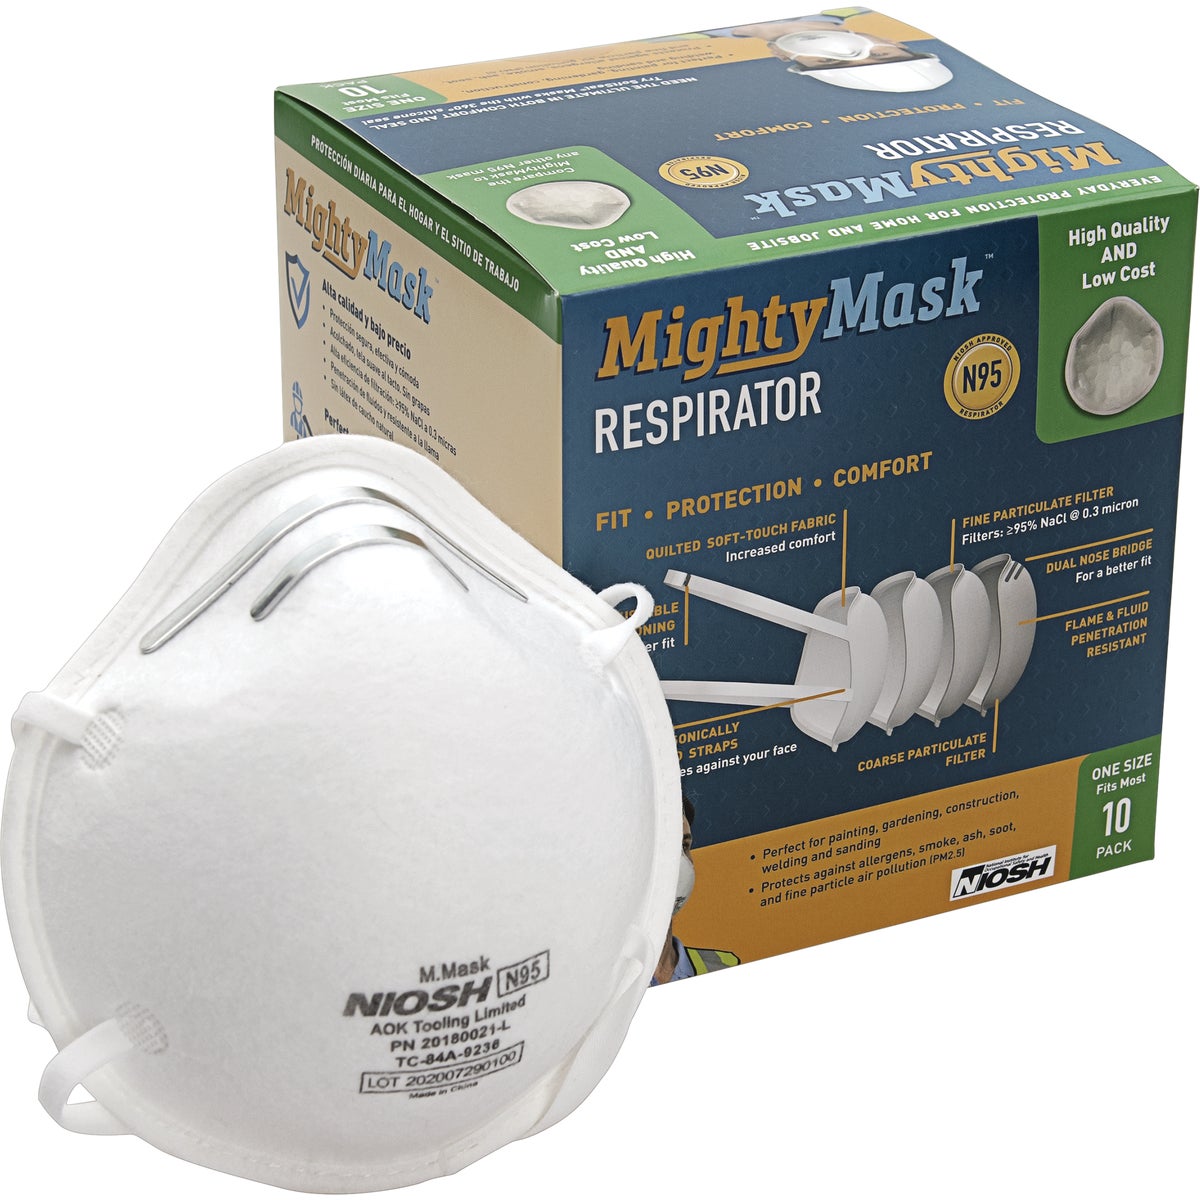 Mighty Mask Disposable N95 Face Mask (10-Pack)